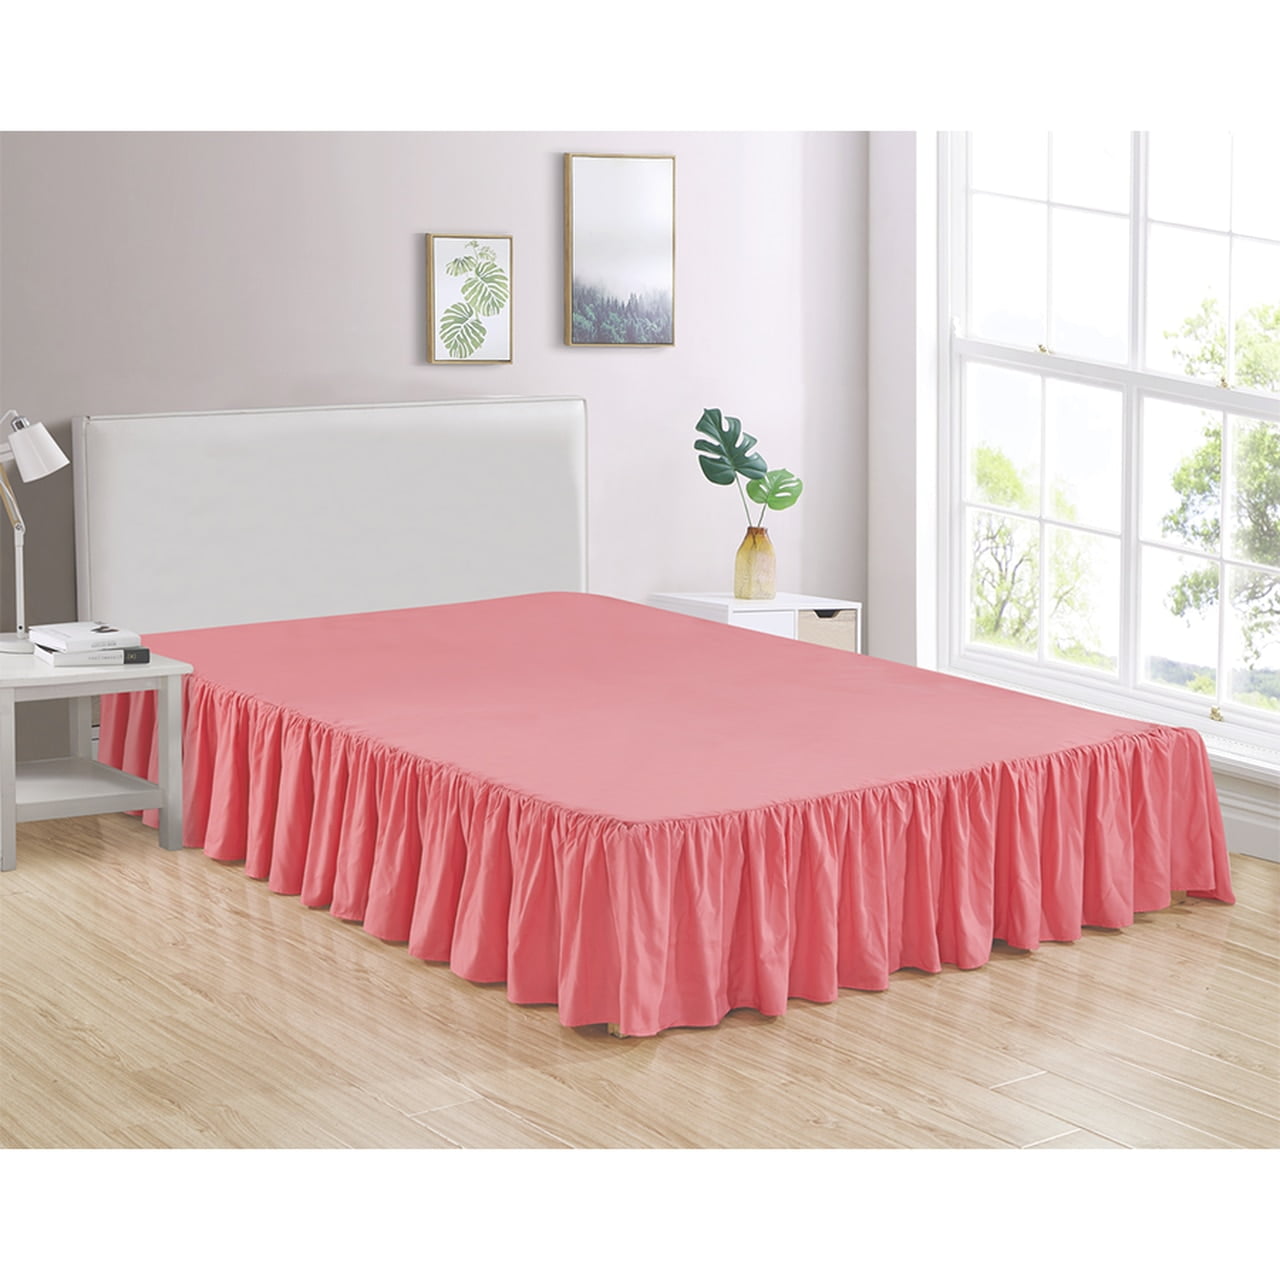 Legacy Decor Bed Skirt Dust Ruffle 100, Pink Twin Size Bed Skirt